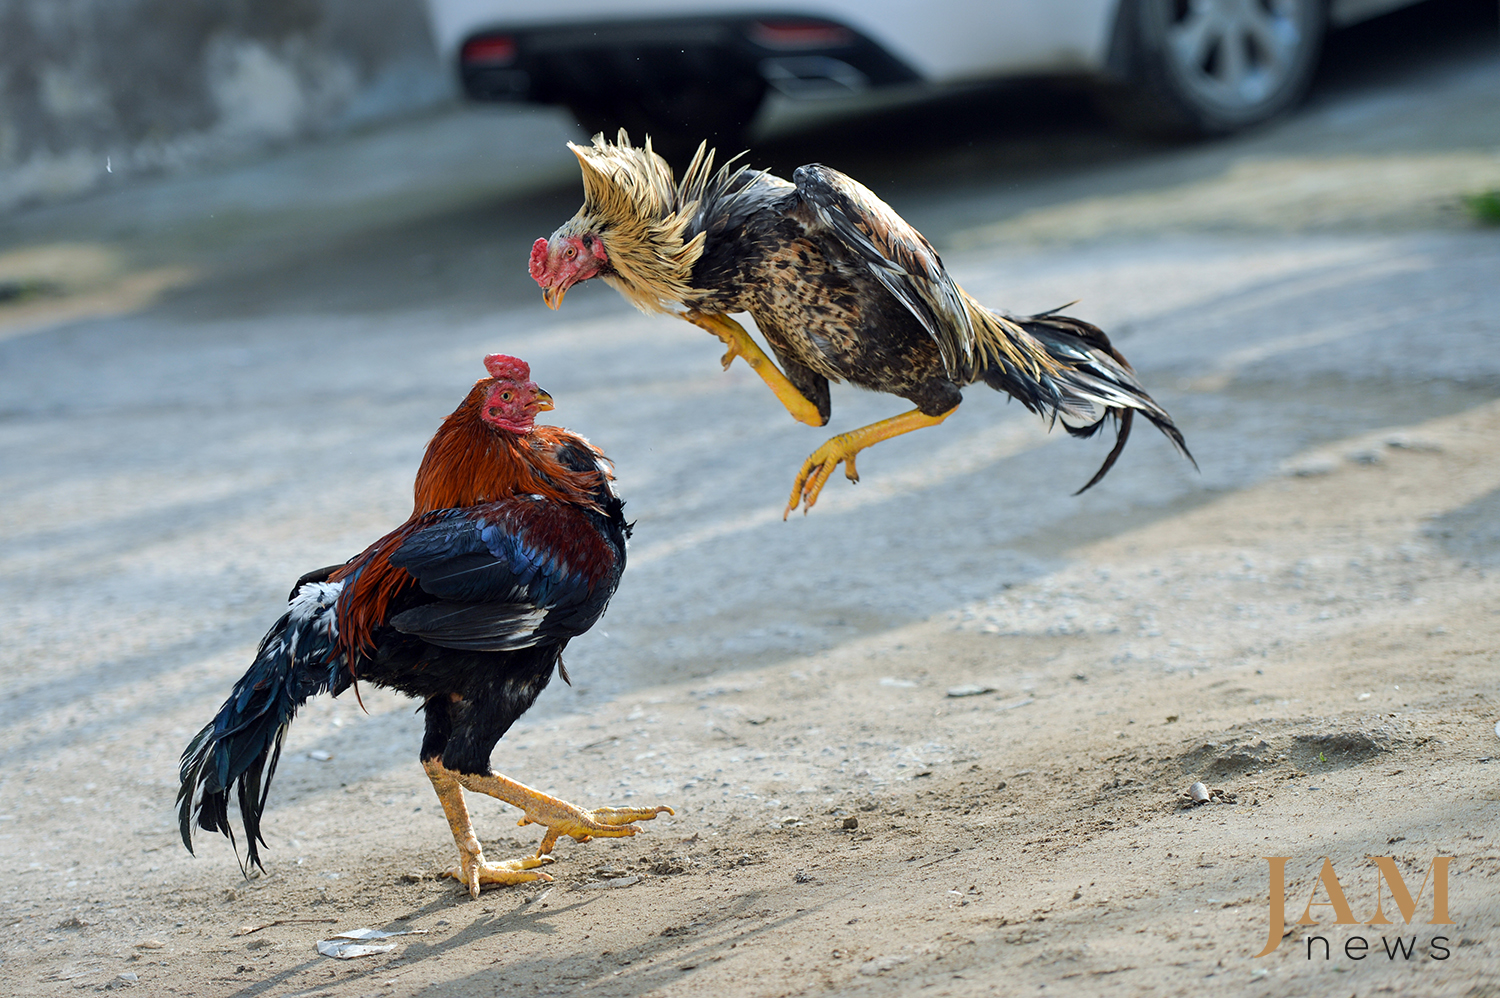 The losing gamecock is the one that either falls unconscious on the ground or runs away from the pit. Photo JAMnews. Cockfighting in Azerbaijan